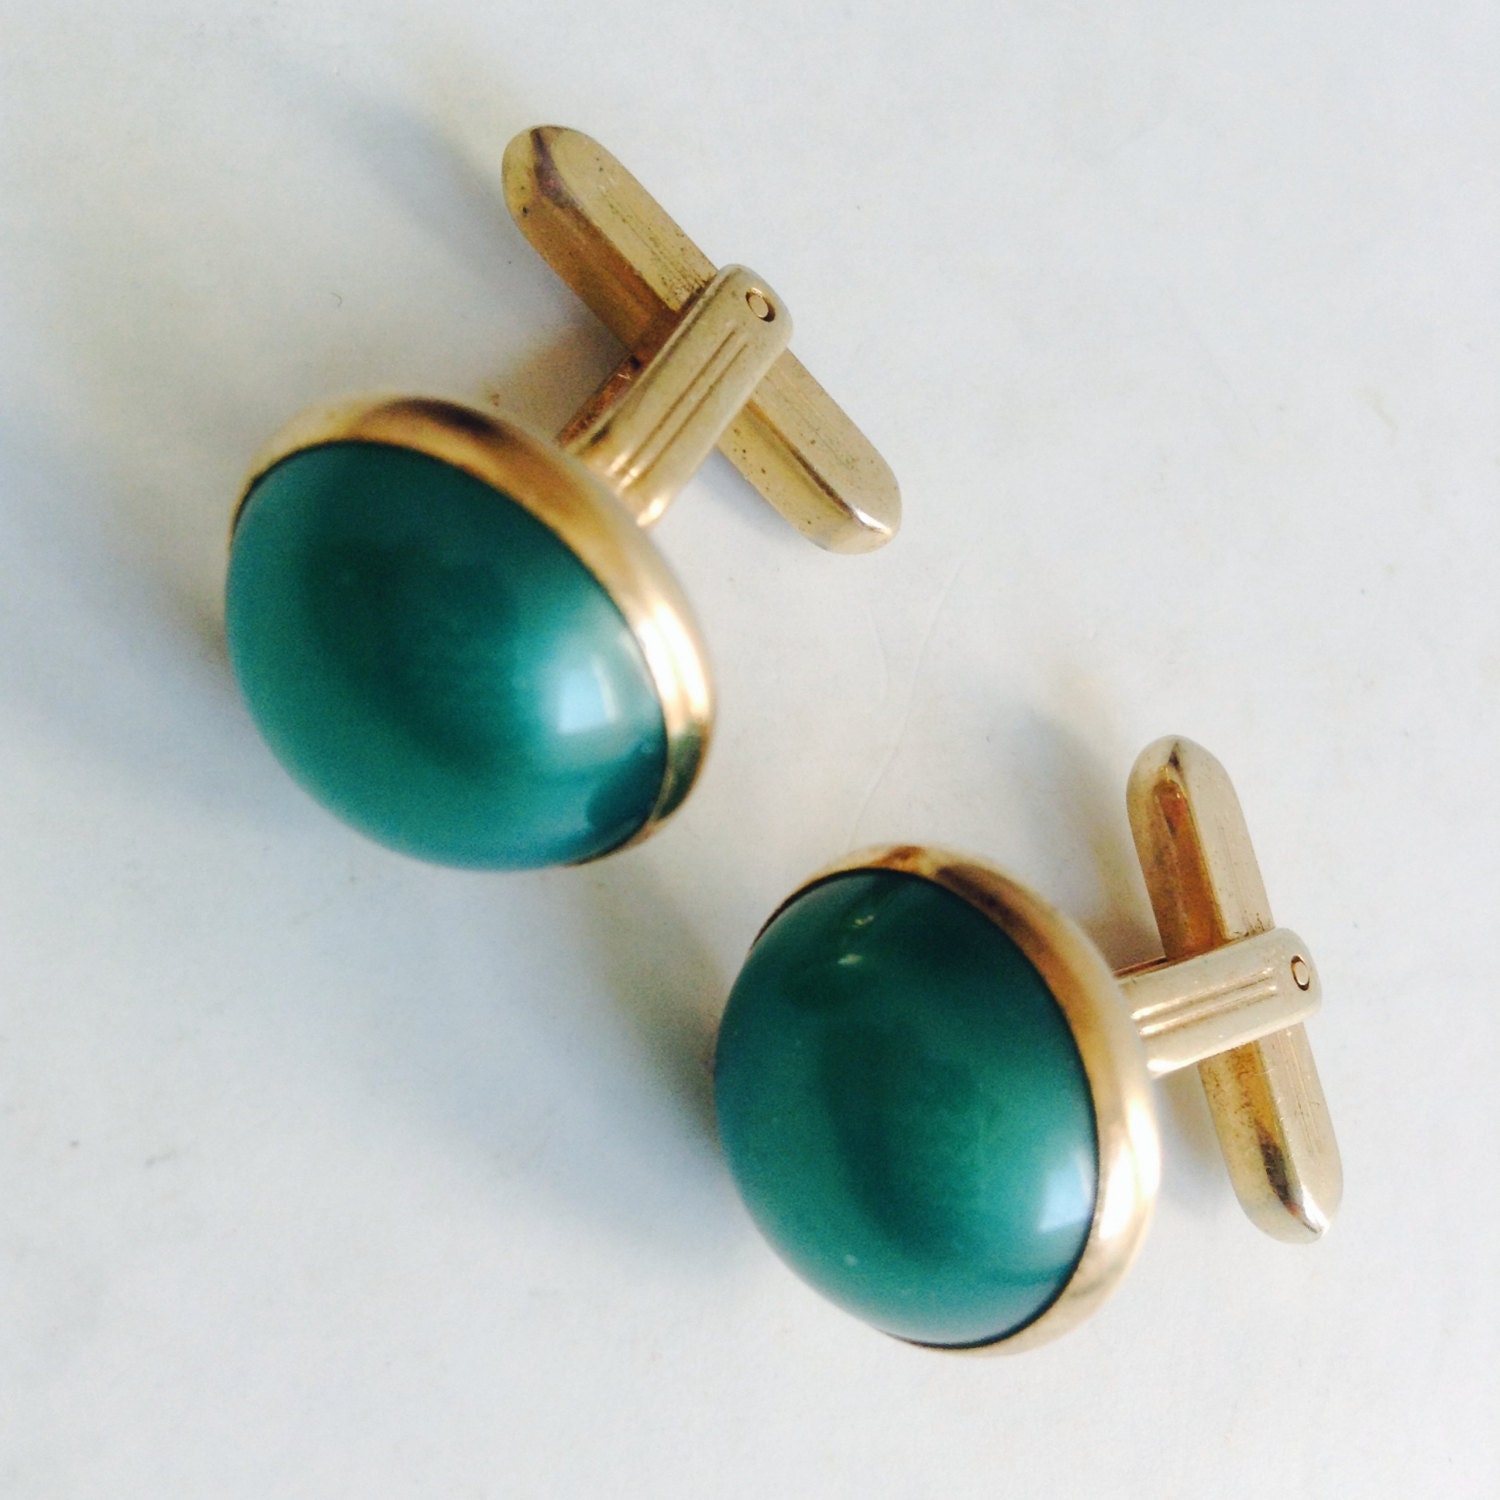 Vintage Hickok Cufflinks from the 60's. Green Moonglow